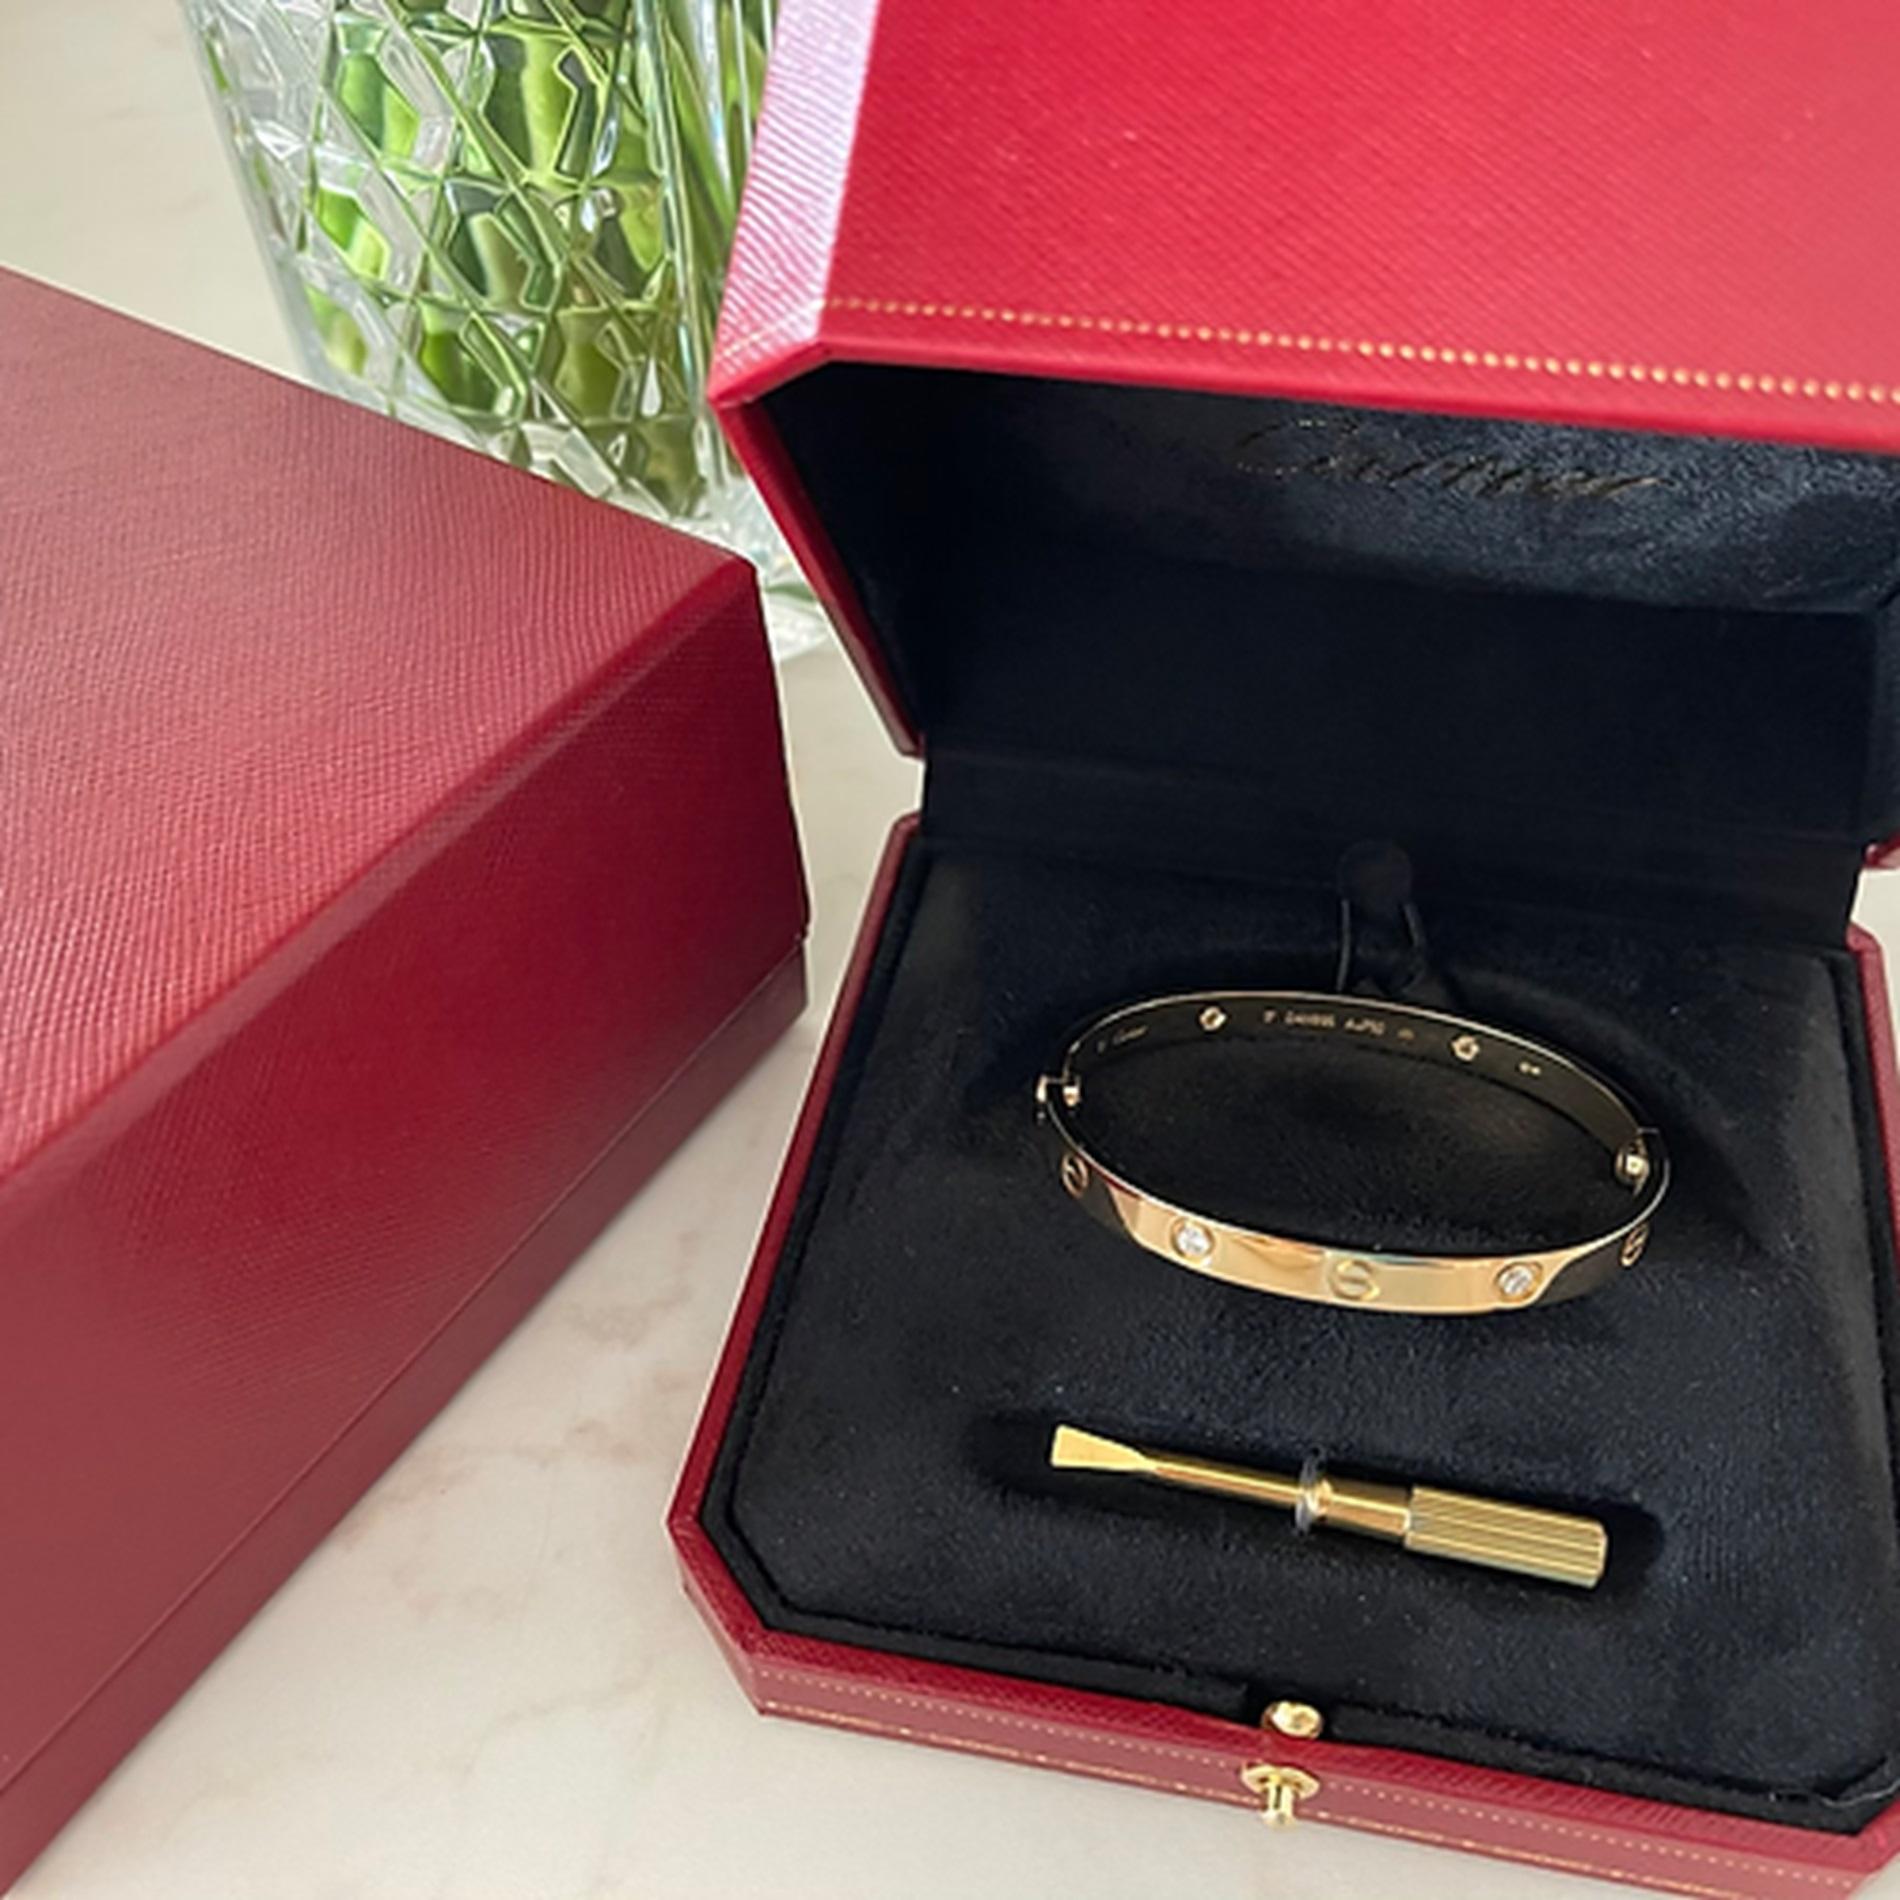 Cartier LOVE 18 Carats Yellow Gold Diamond Bracelet In Excellent Condition For Sale In Rome, IT